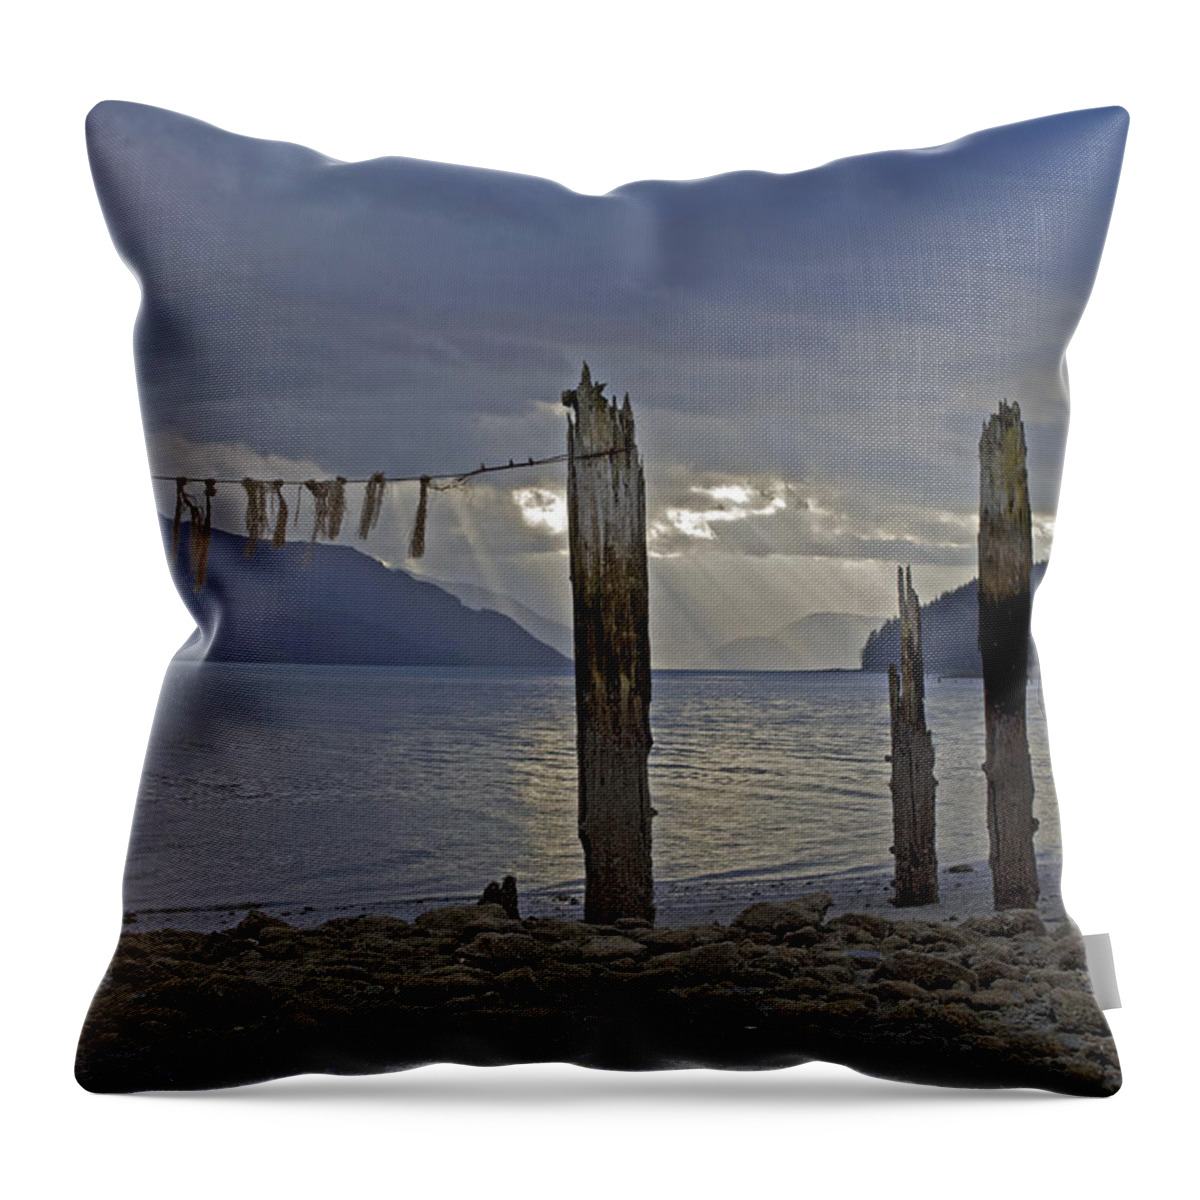 Treadwell Throw Pillow featuring the photograph Early Morning by Cathy Mahnke